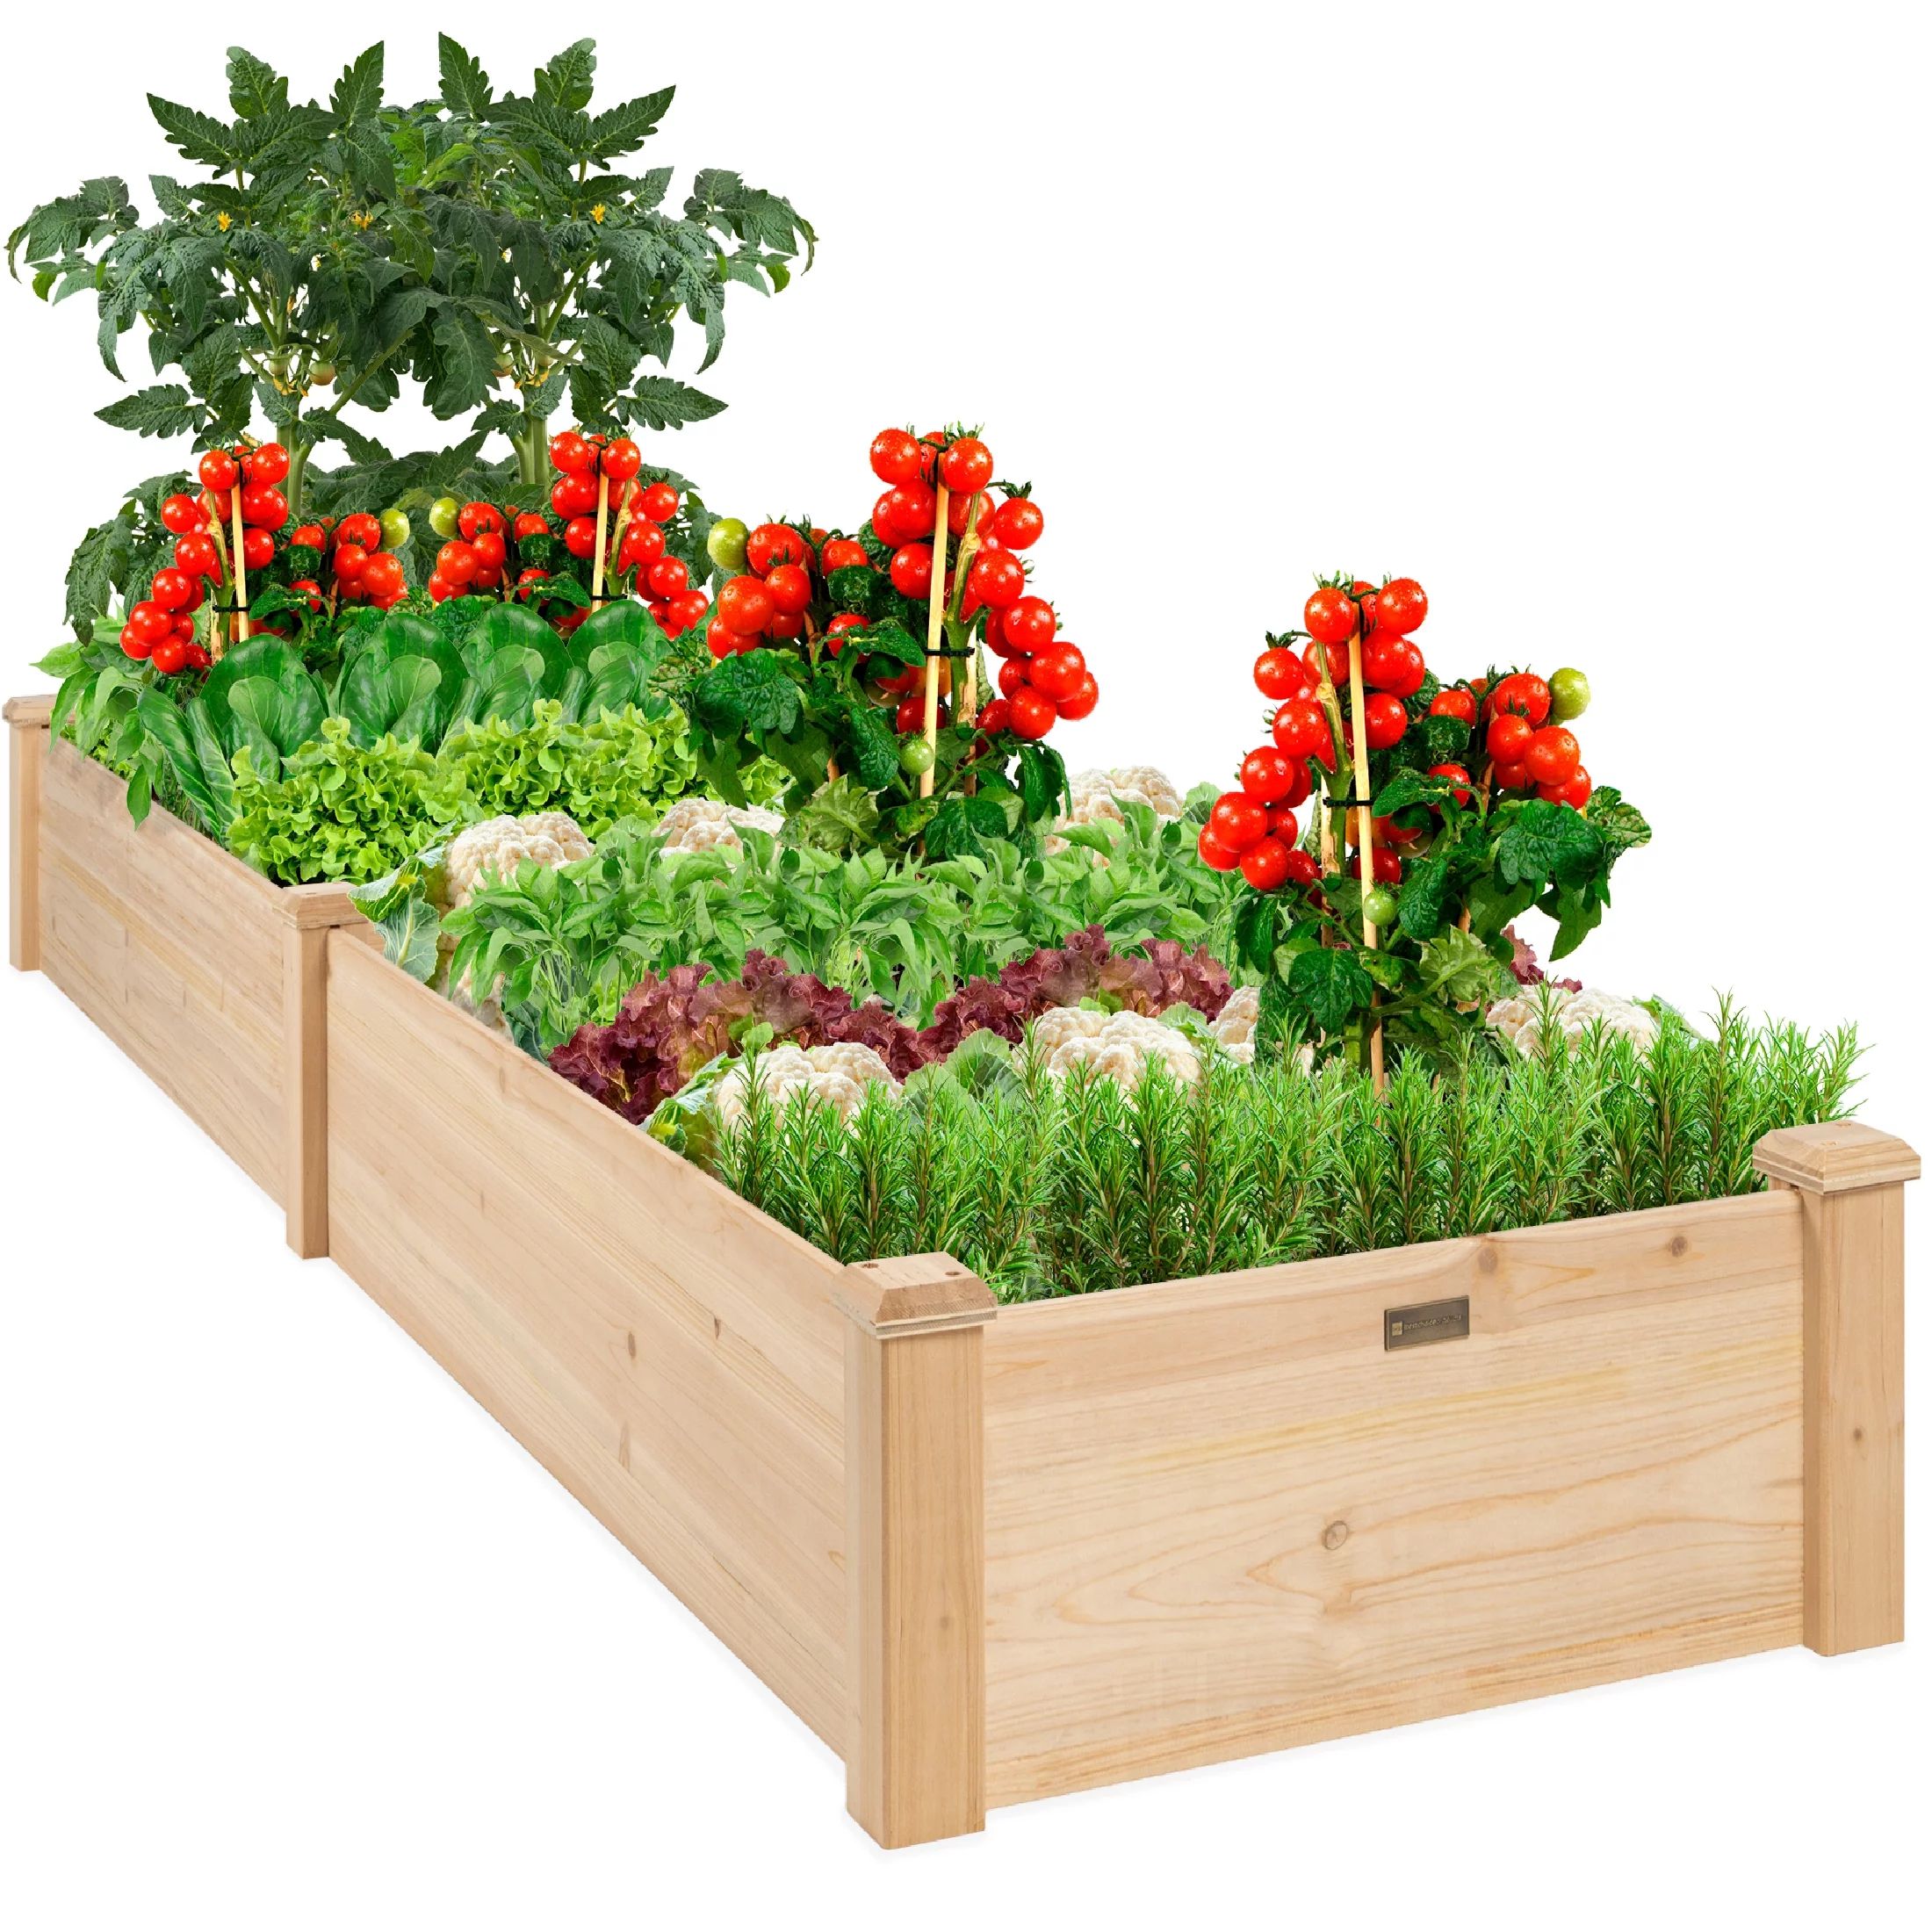 Best Choice Products 8x2ft Outdoor Wooden Raised Garden Bed Planter for Grass, Lawn, Yard - Natur... | Walmart (US)